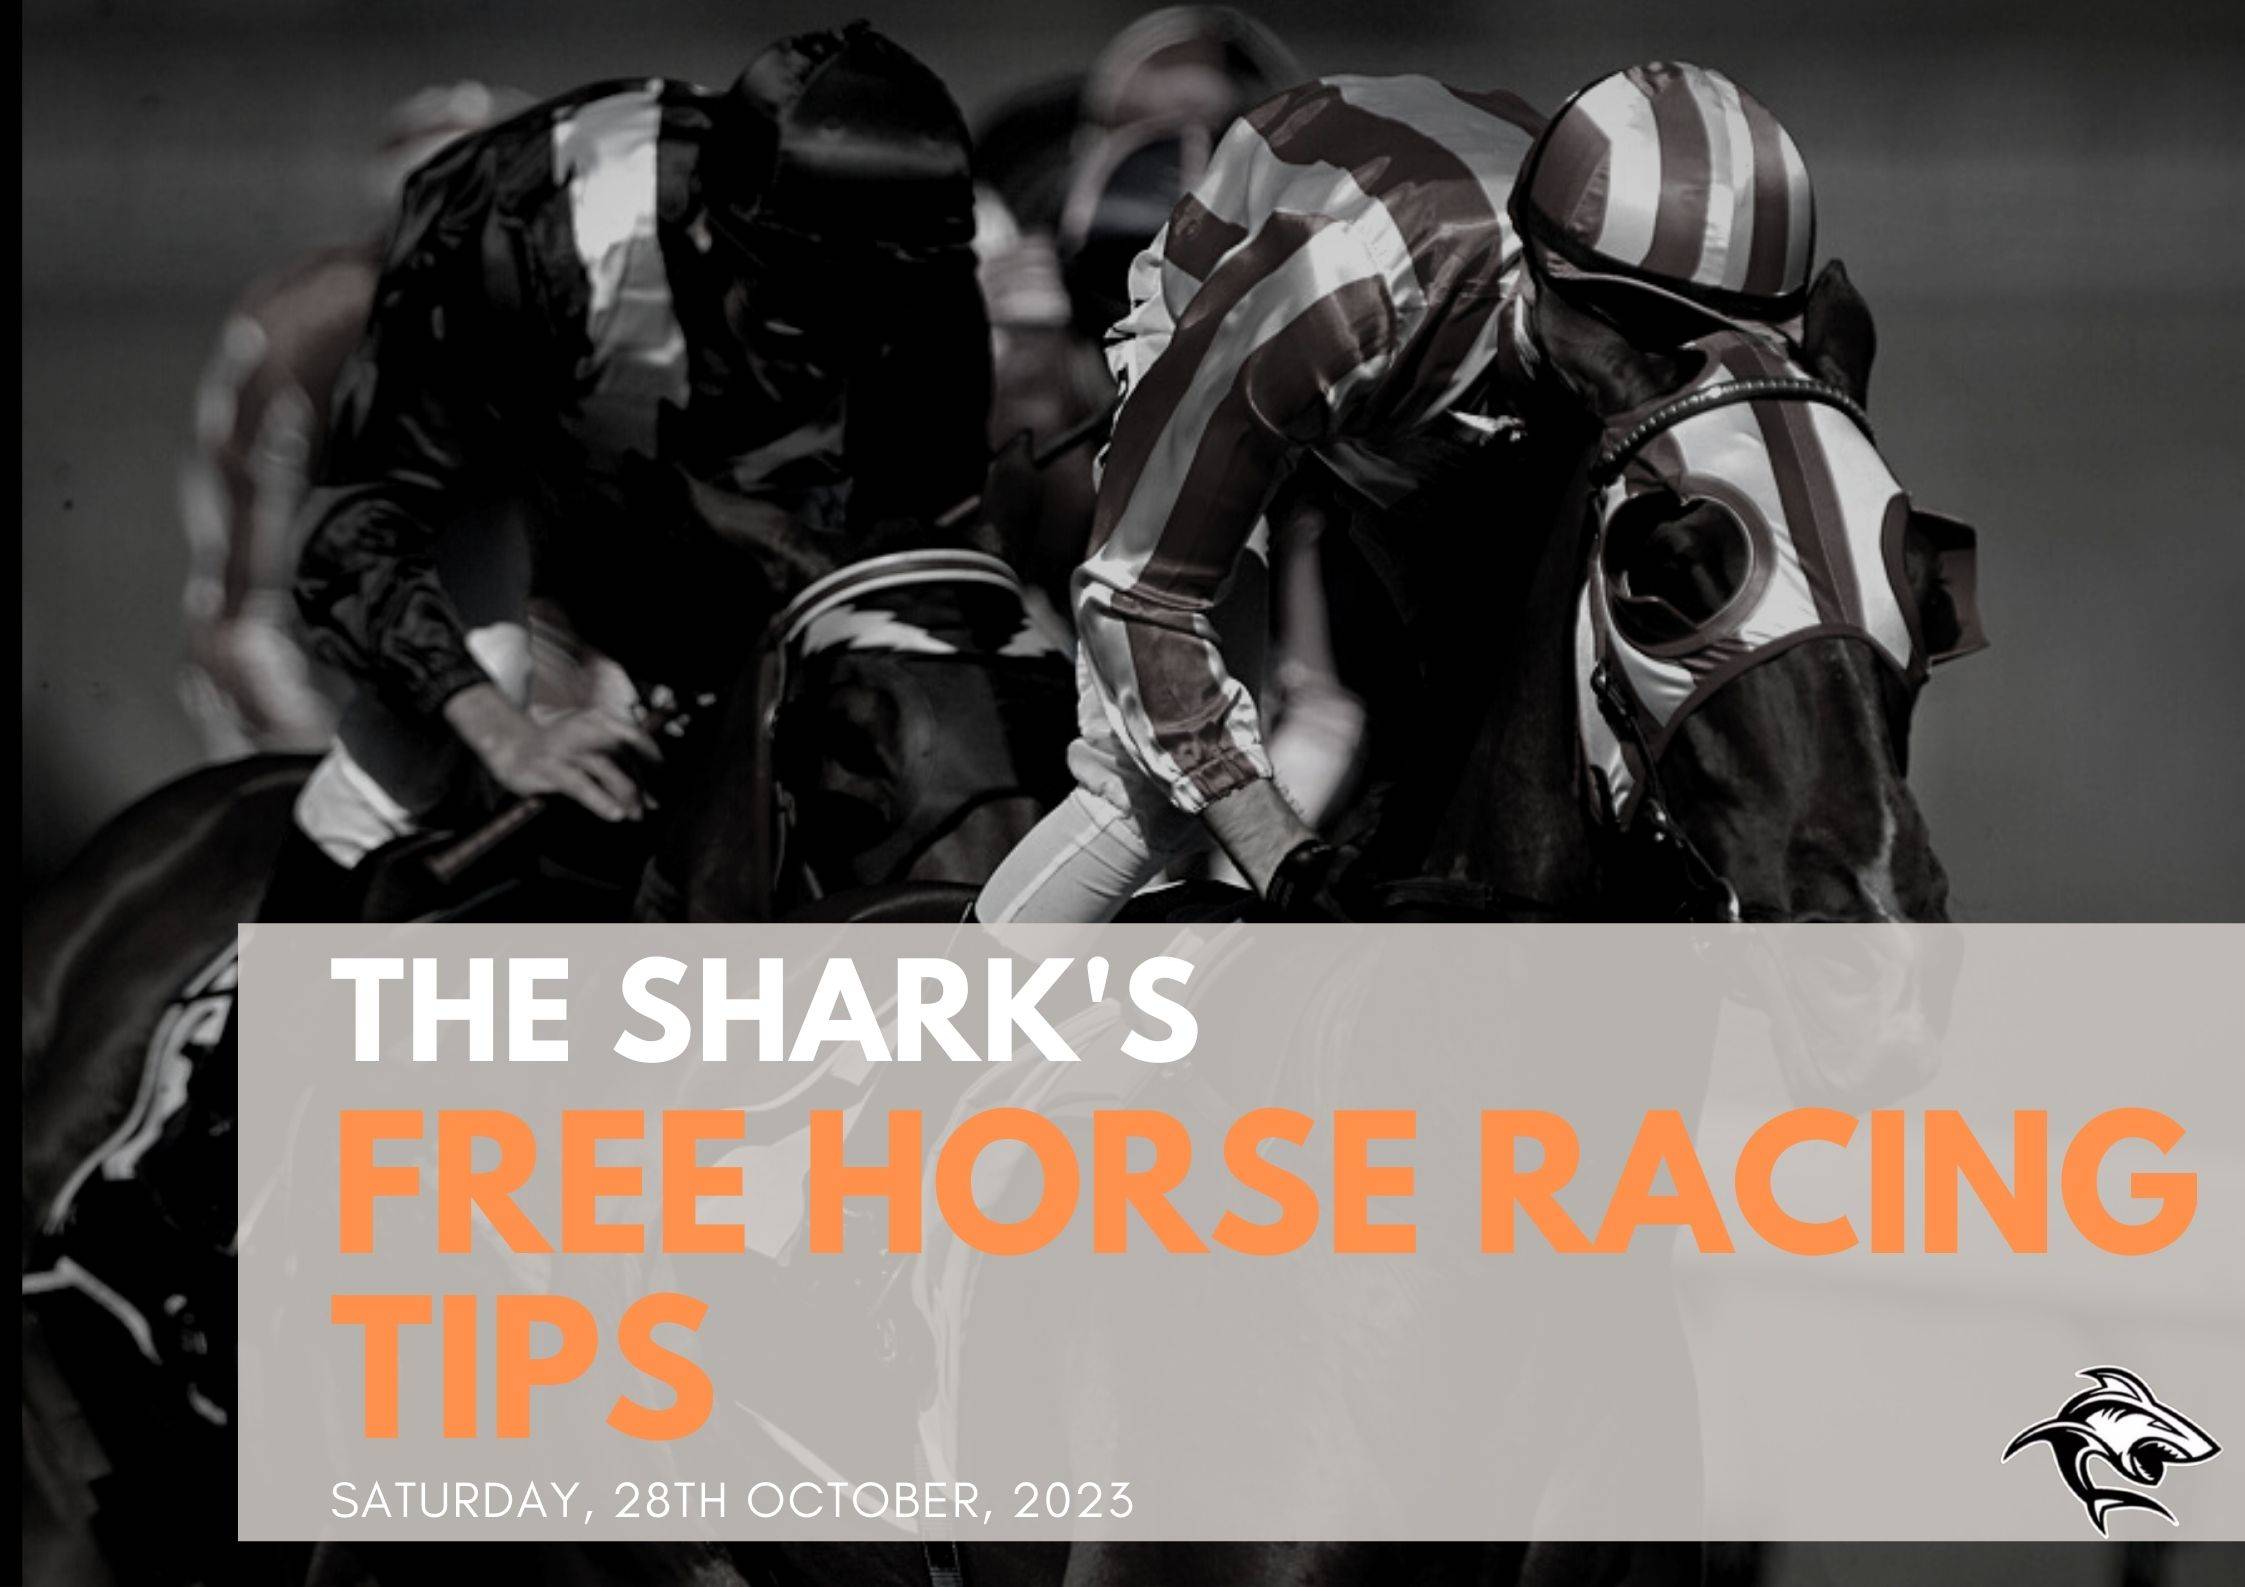 Free Horse Racing Tips - 28th Oct